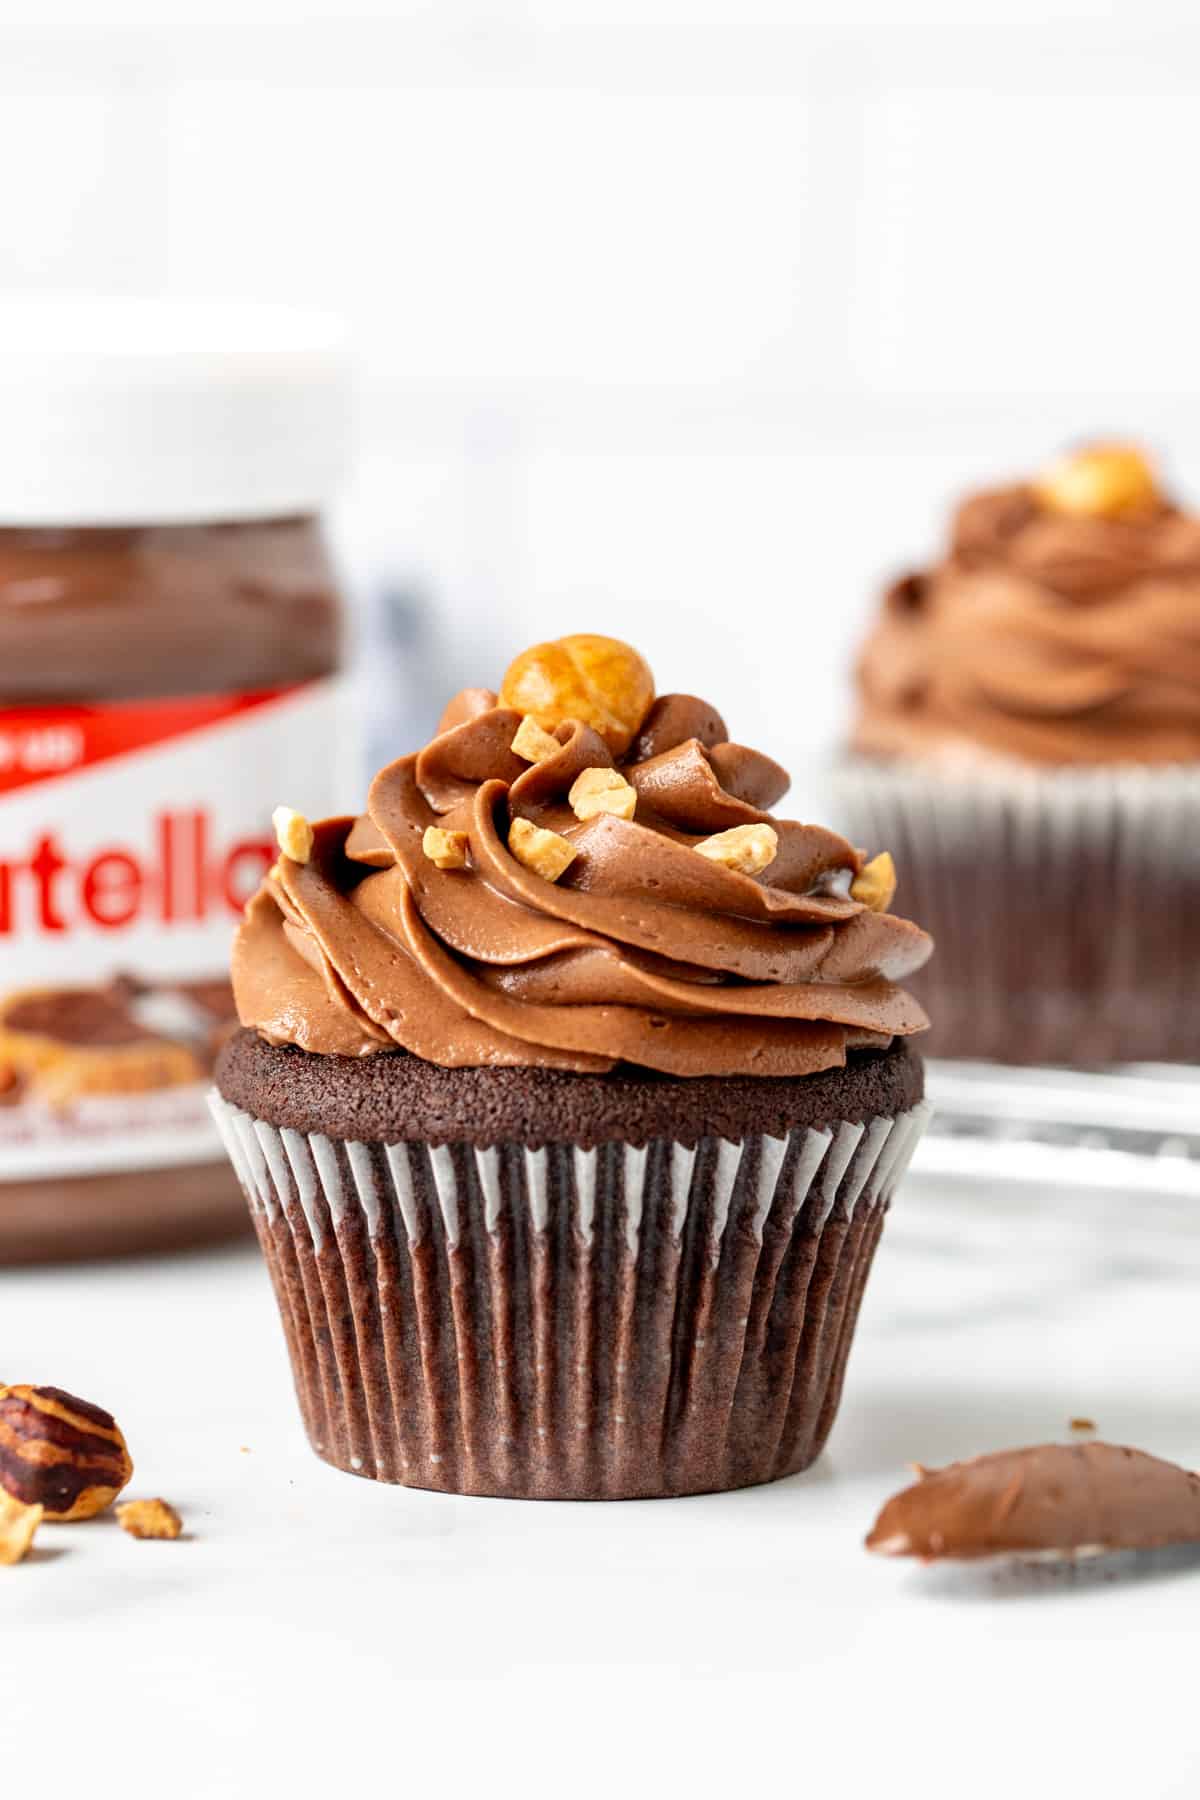 Nutella cupcake with Nutella frosting and jar of Nutella